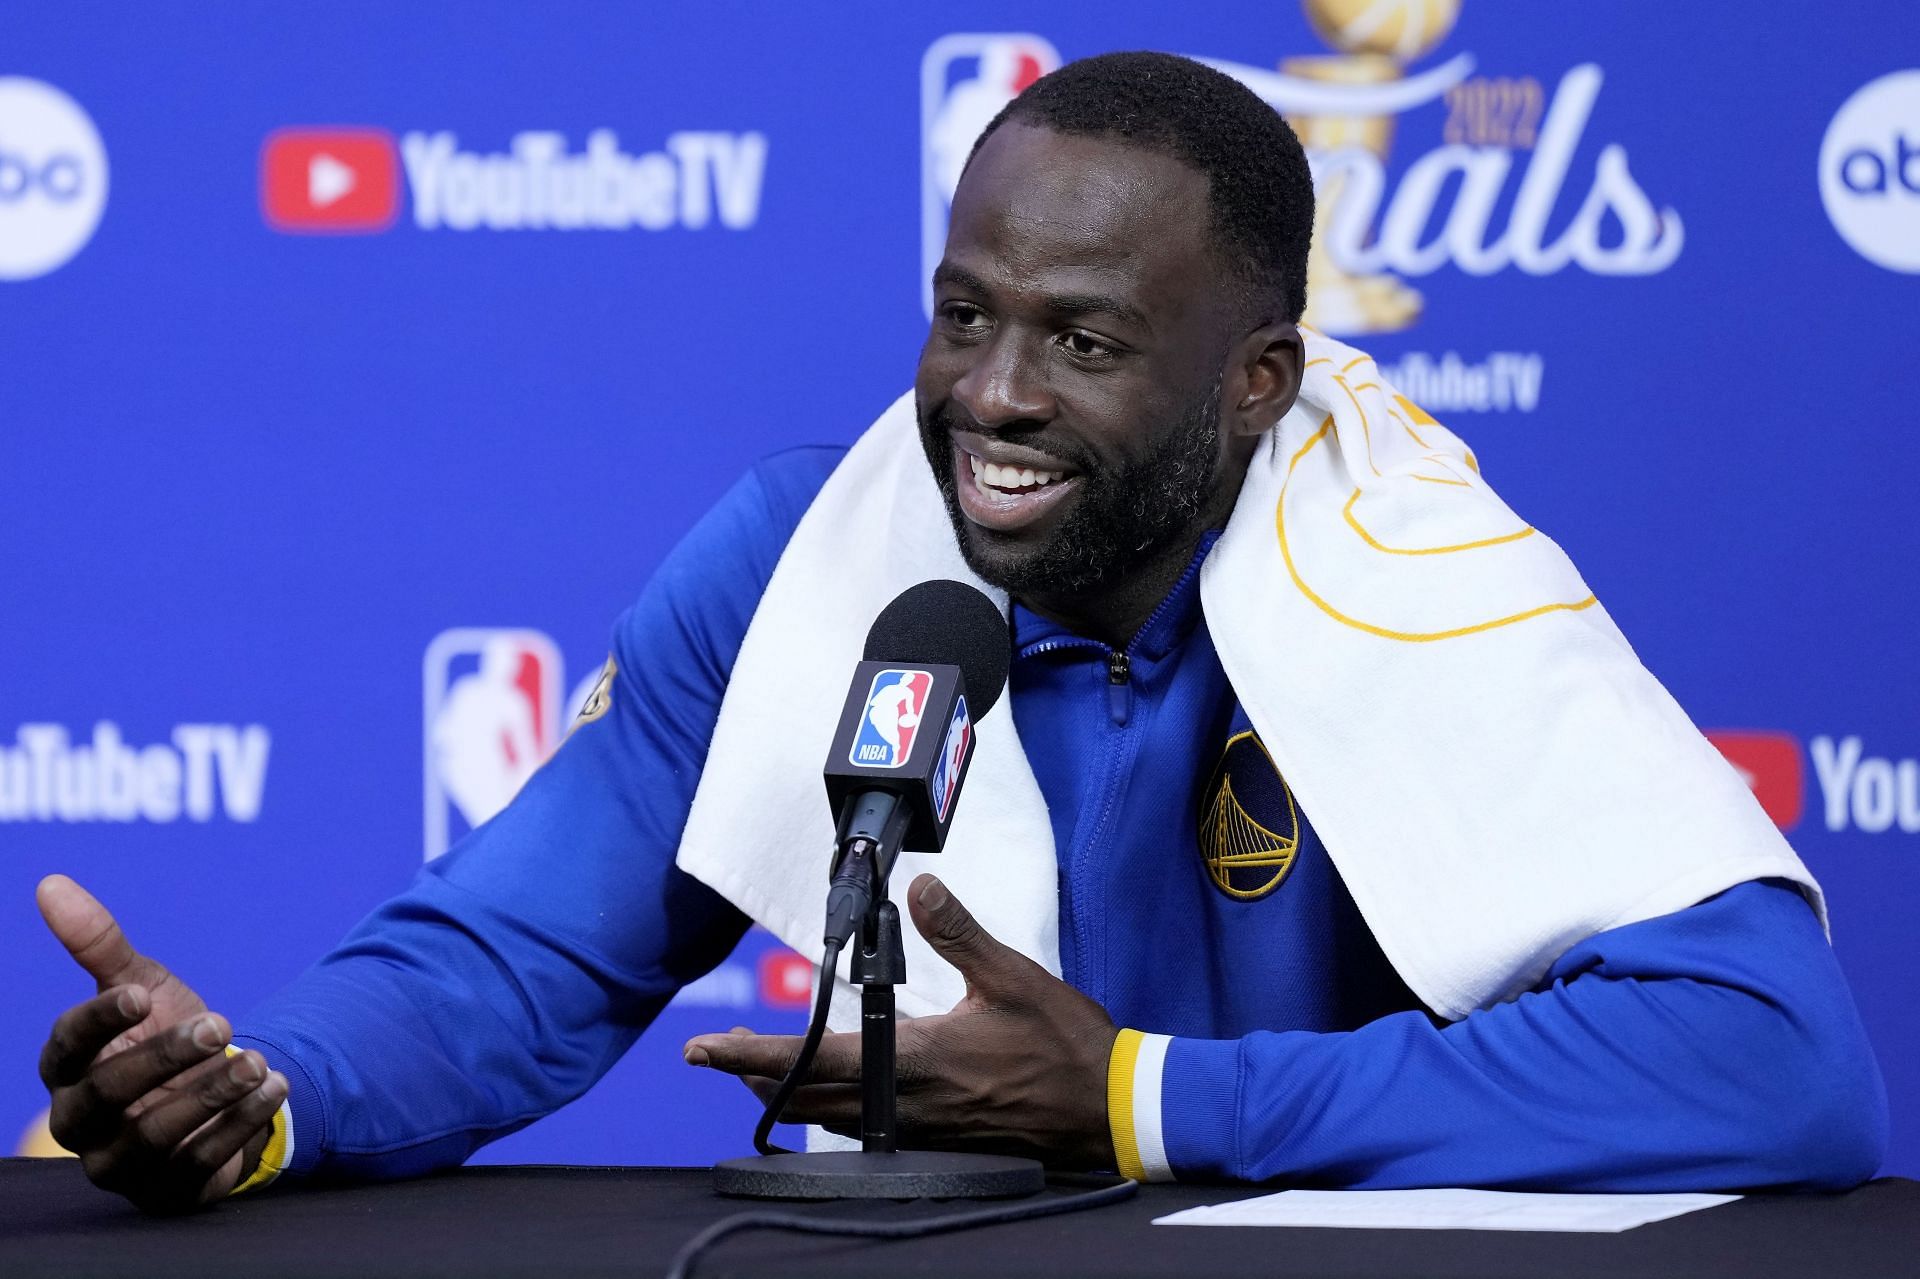 Draymond Green of the Golden State Warriors talks during a news conference after a 104-94 win over the Boston Celtics in Game 5 of the &lt;a href=&#039;https://www.sportskeeda.com/go/nba-finals&#039; target=&#039;_blank&#039; rel=&#039;noopener noreferrer&#039;&gt;NBA Finals&lt;/a&gt; at Chase Center on Monday in San Francisco, California.